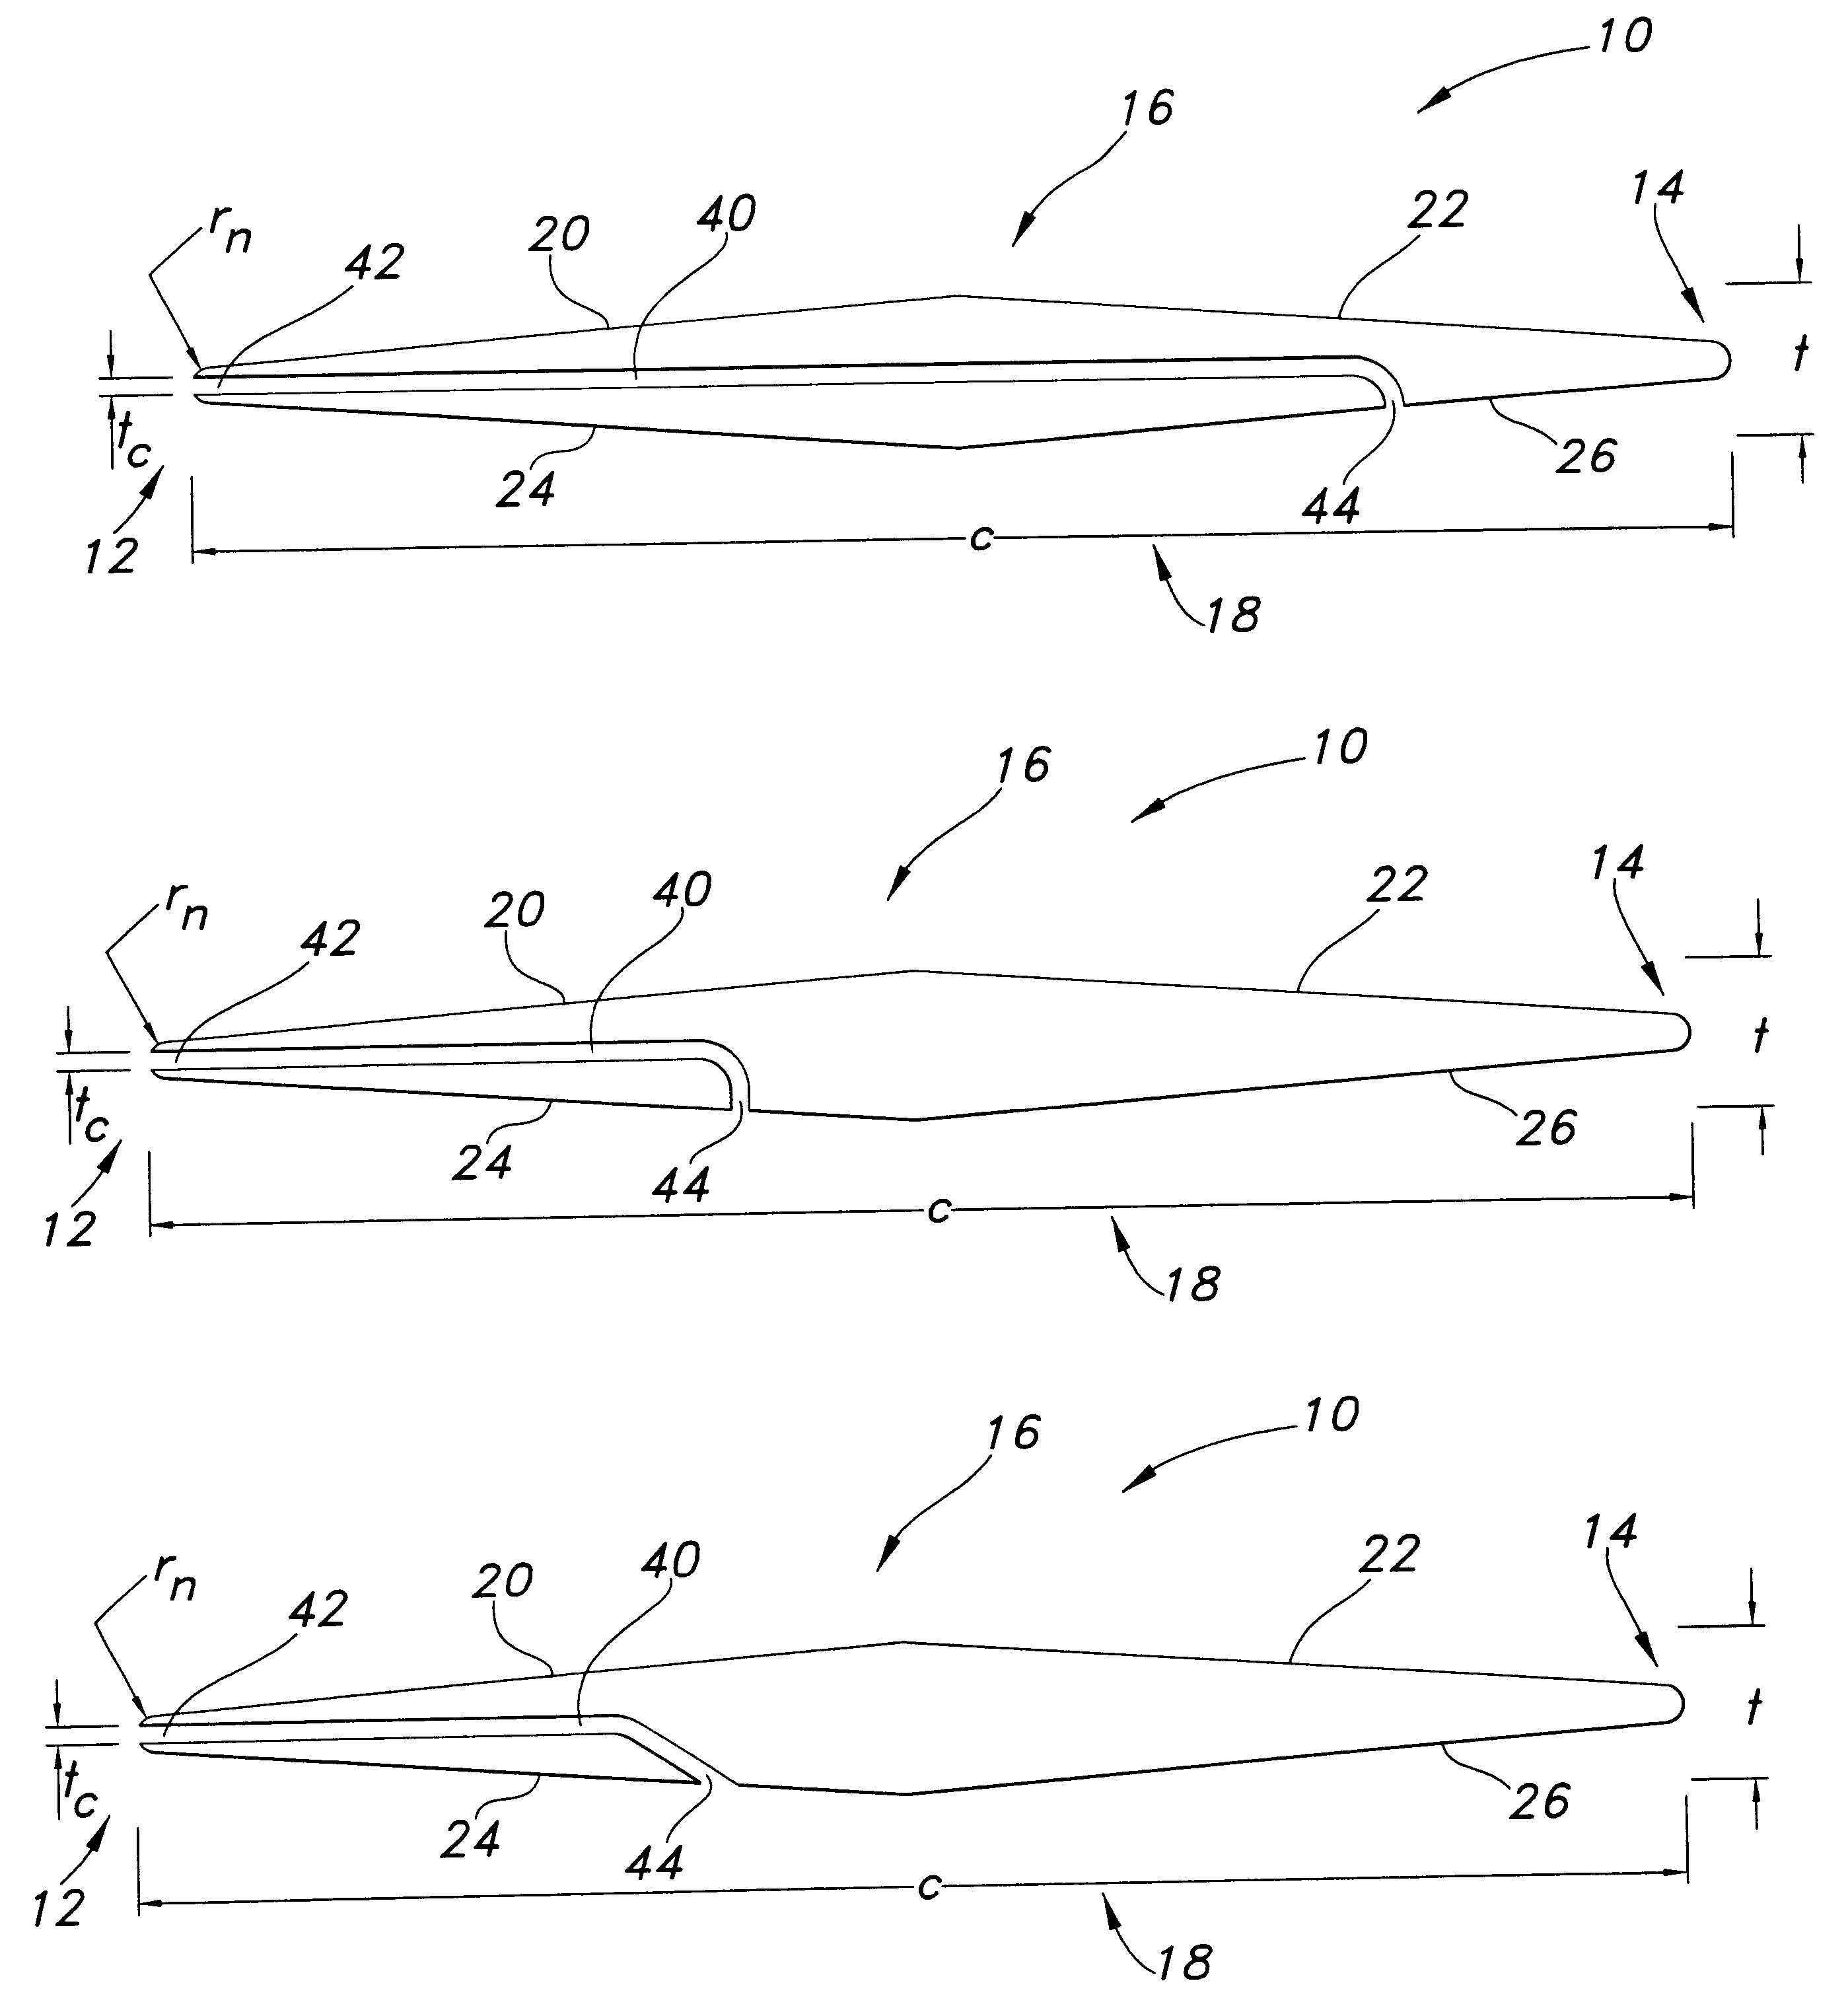 Leading edge channel for enhancement of lift/drag ratio and reduction of sonic boom